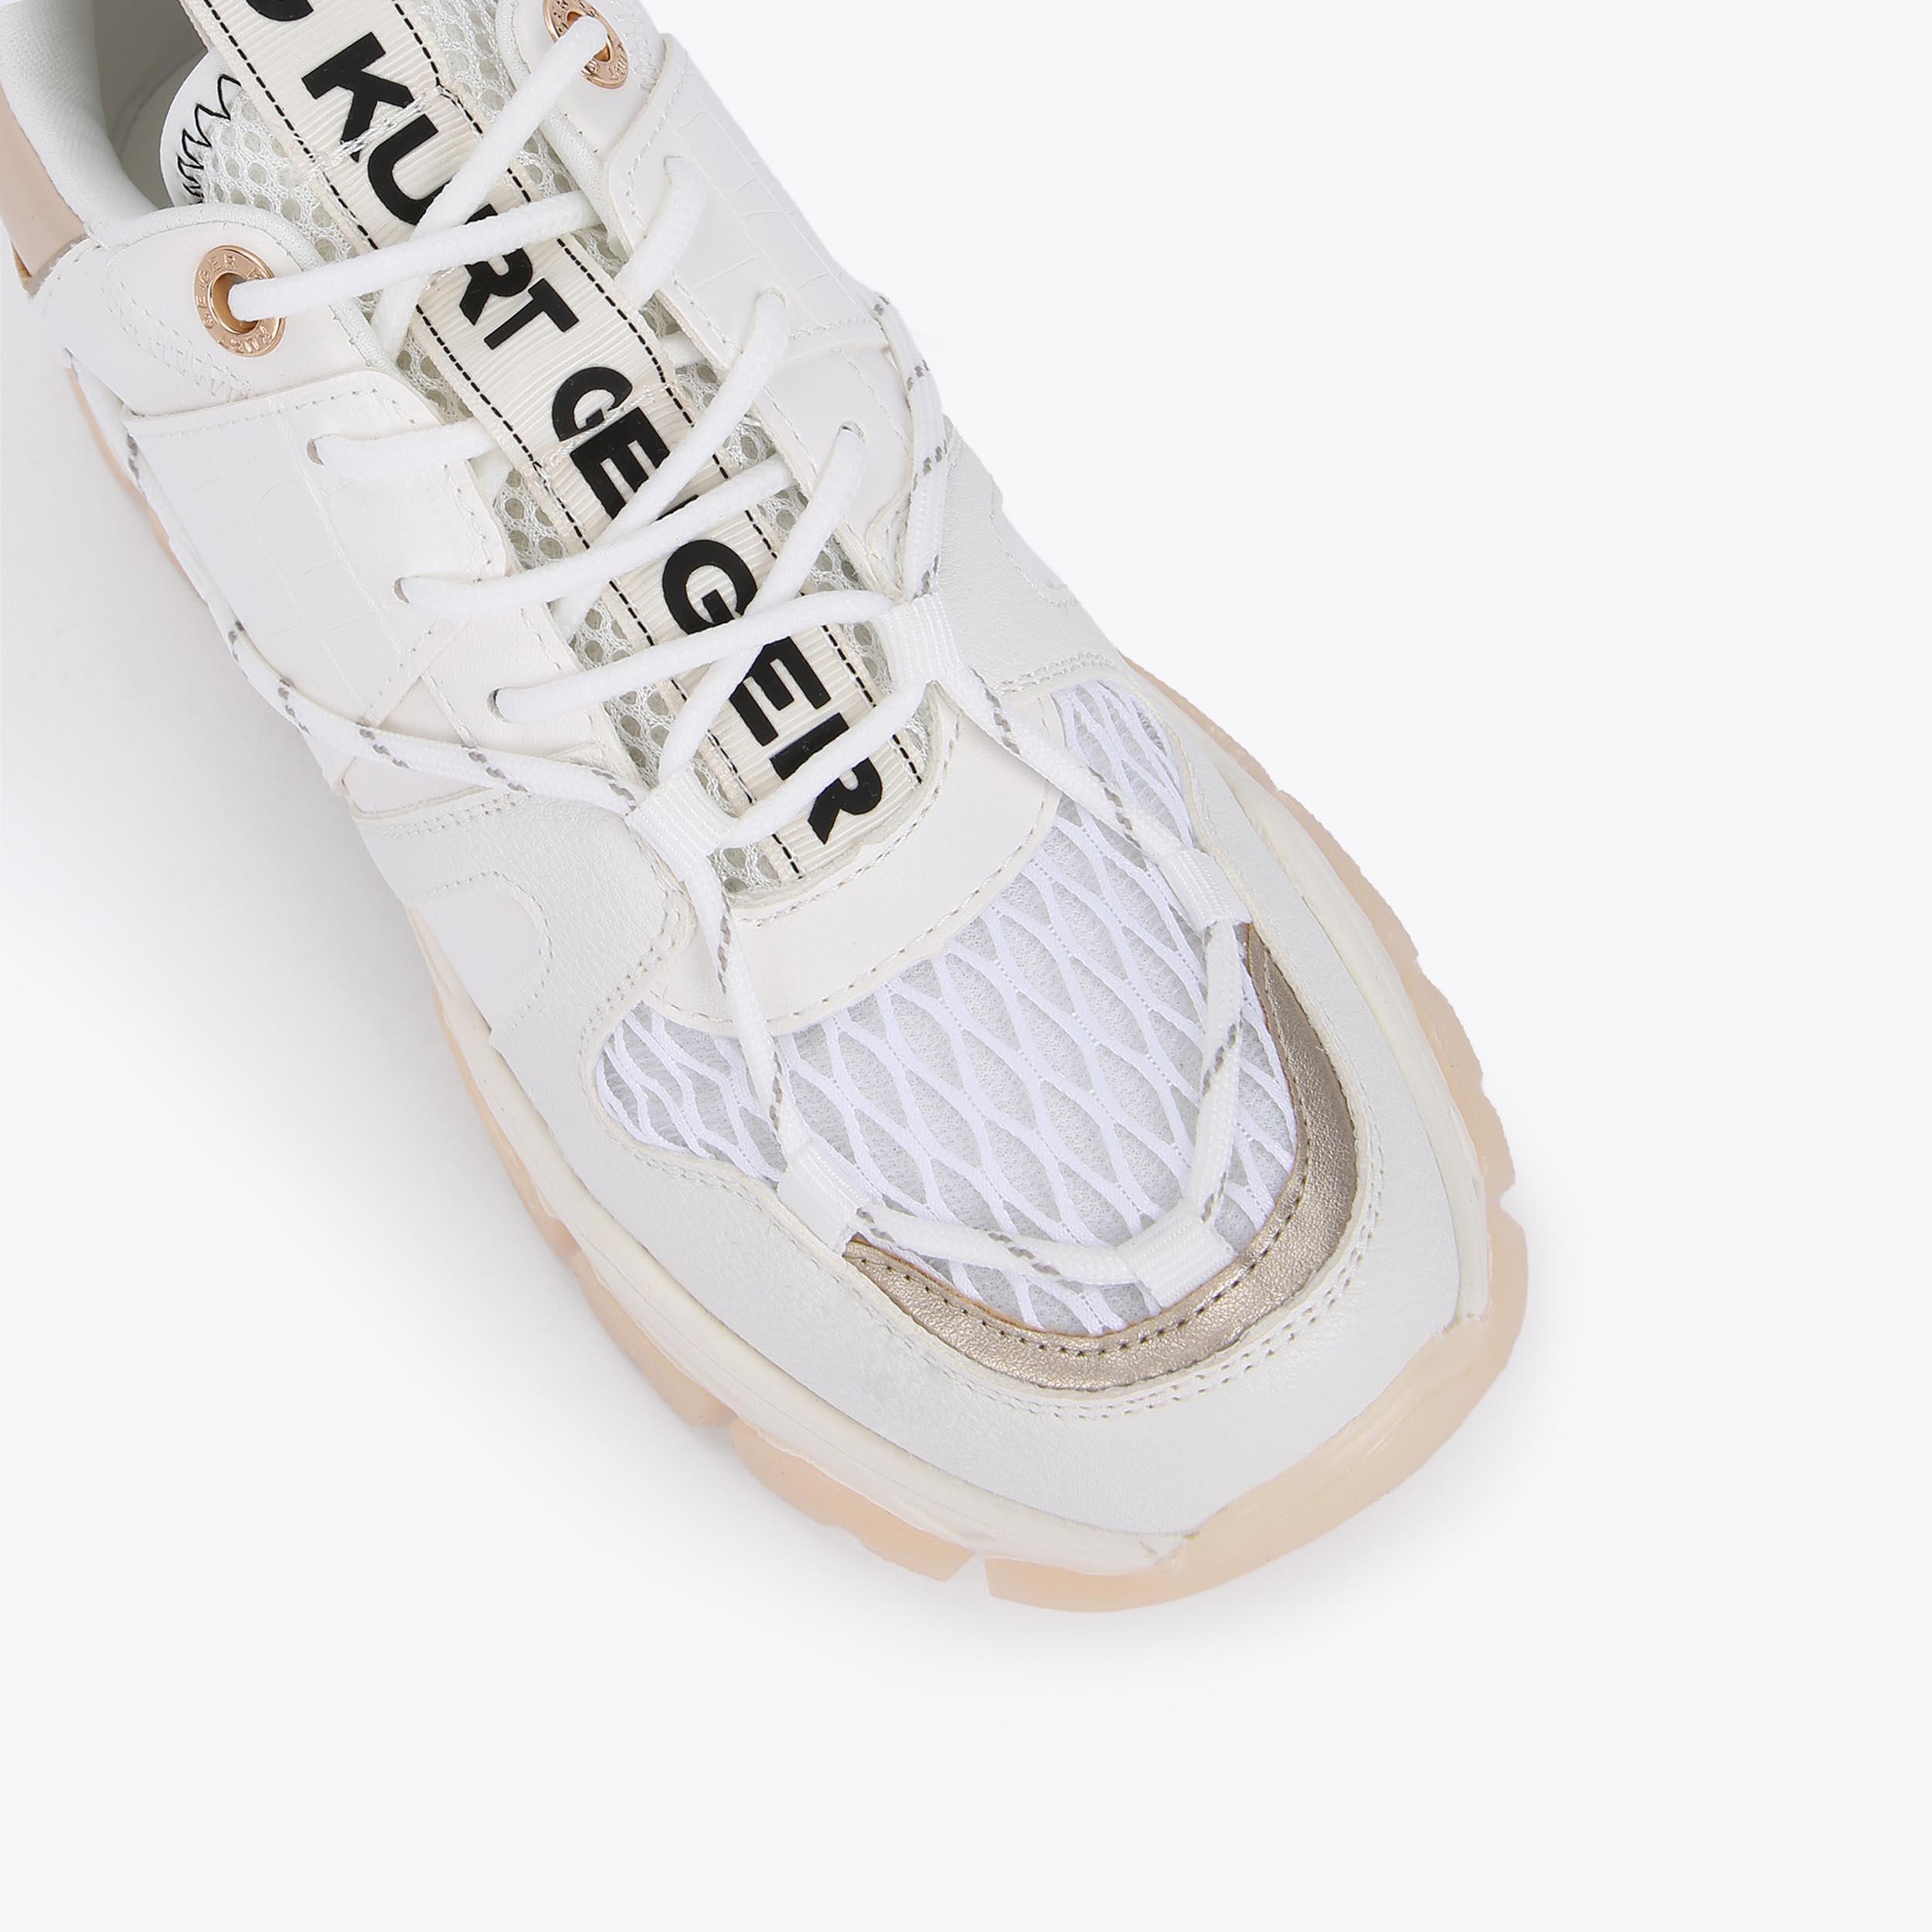 LIMITLESS2 White Lace Up Toggle Sneakers by KG KURT GEIGER